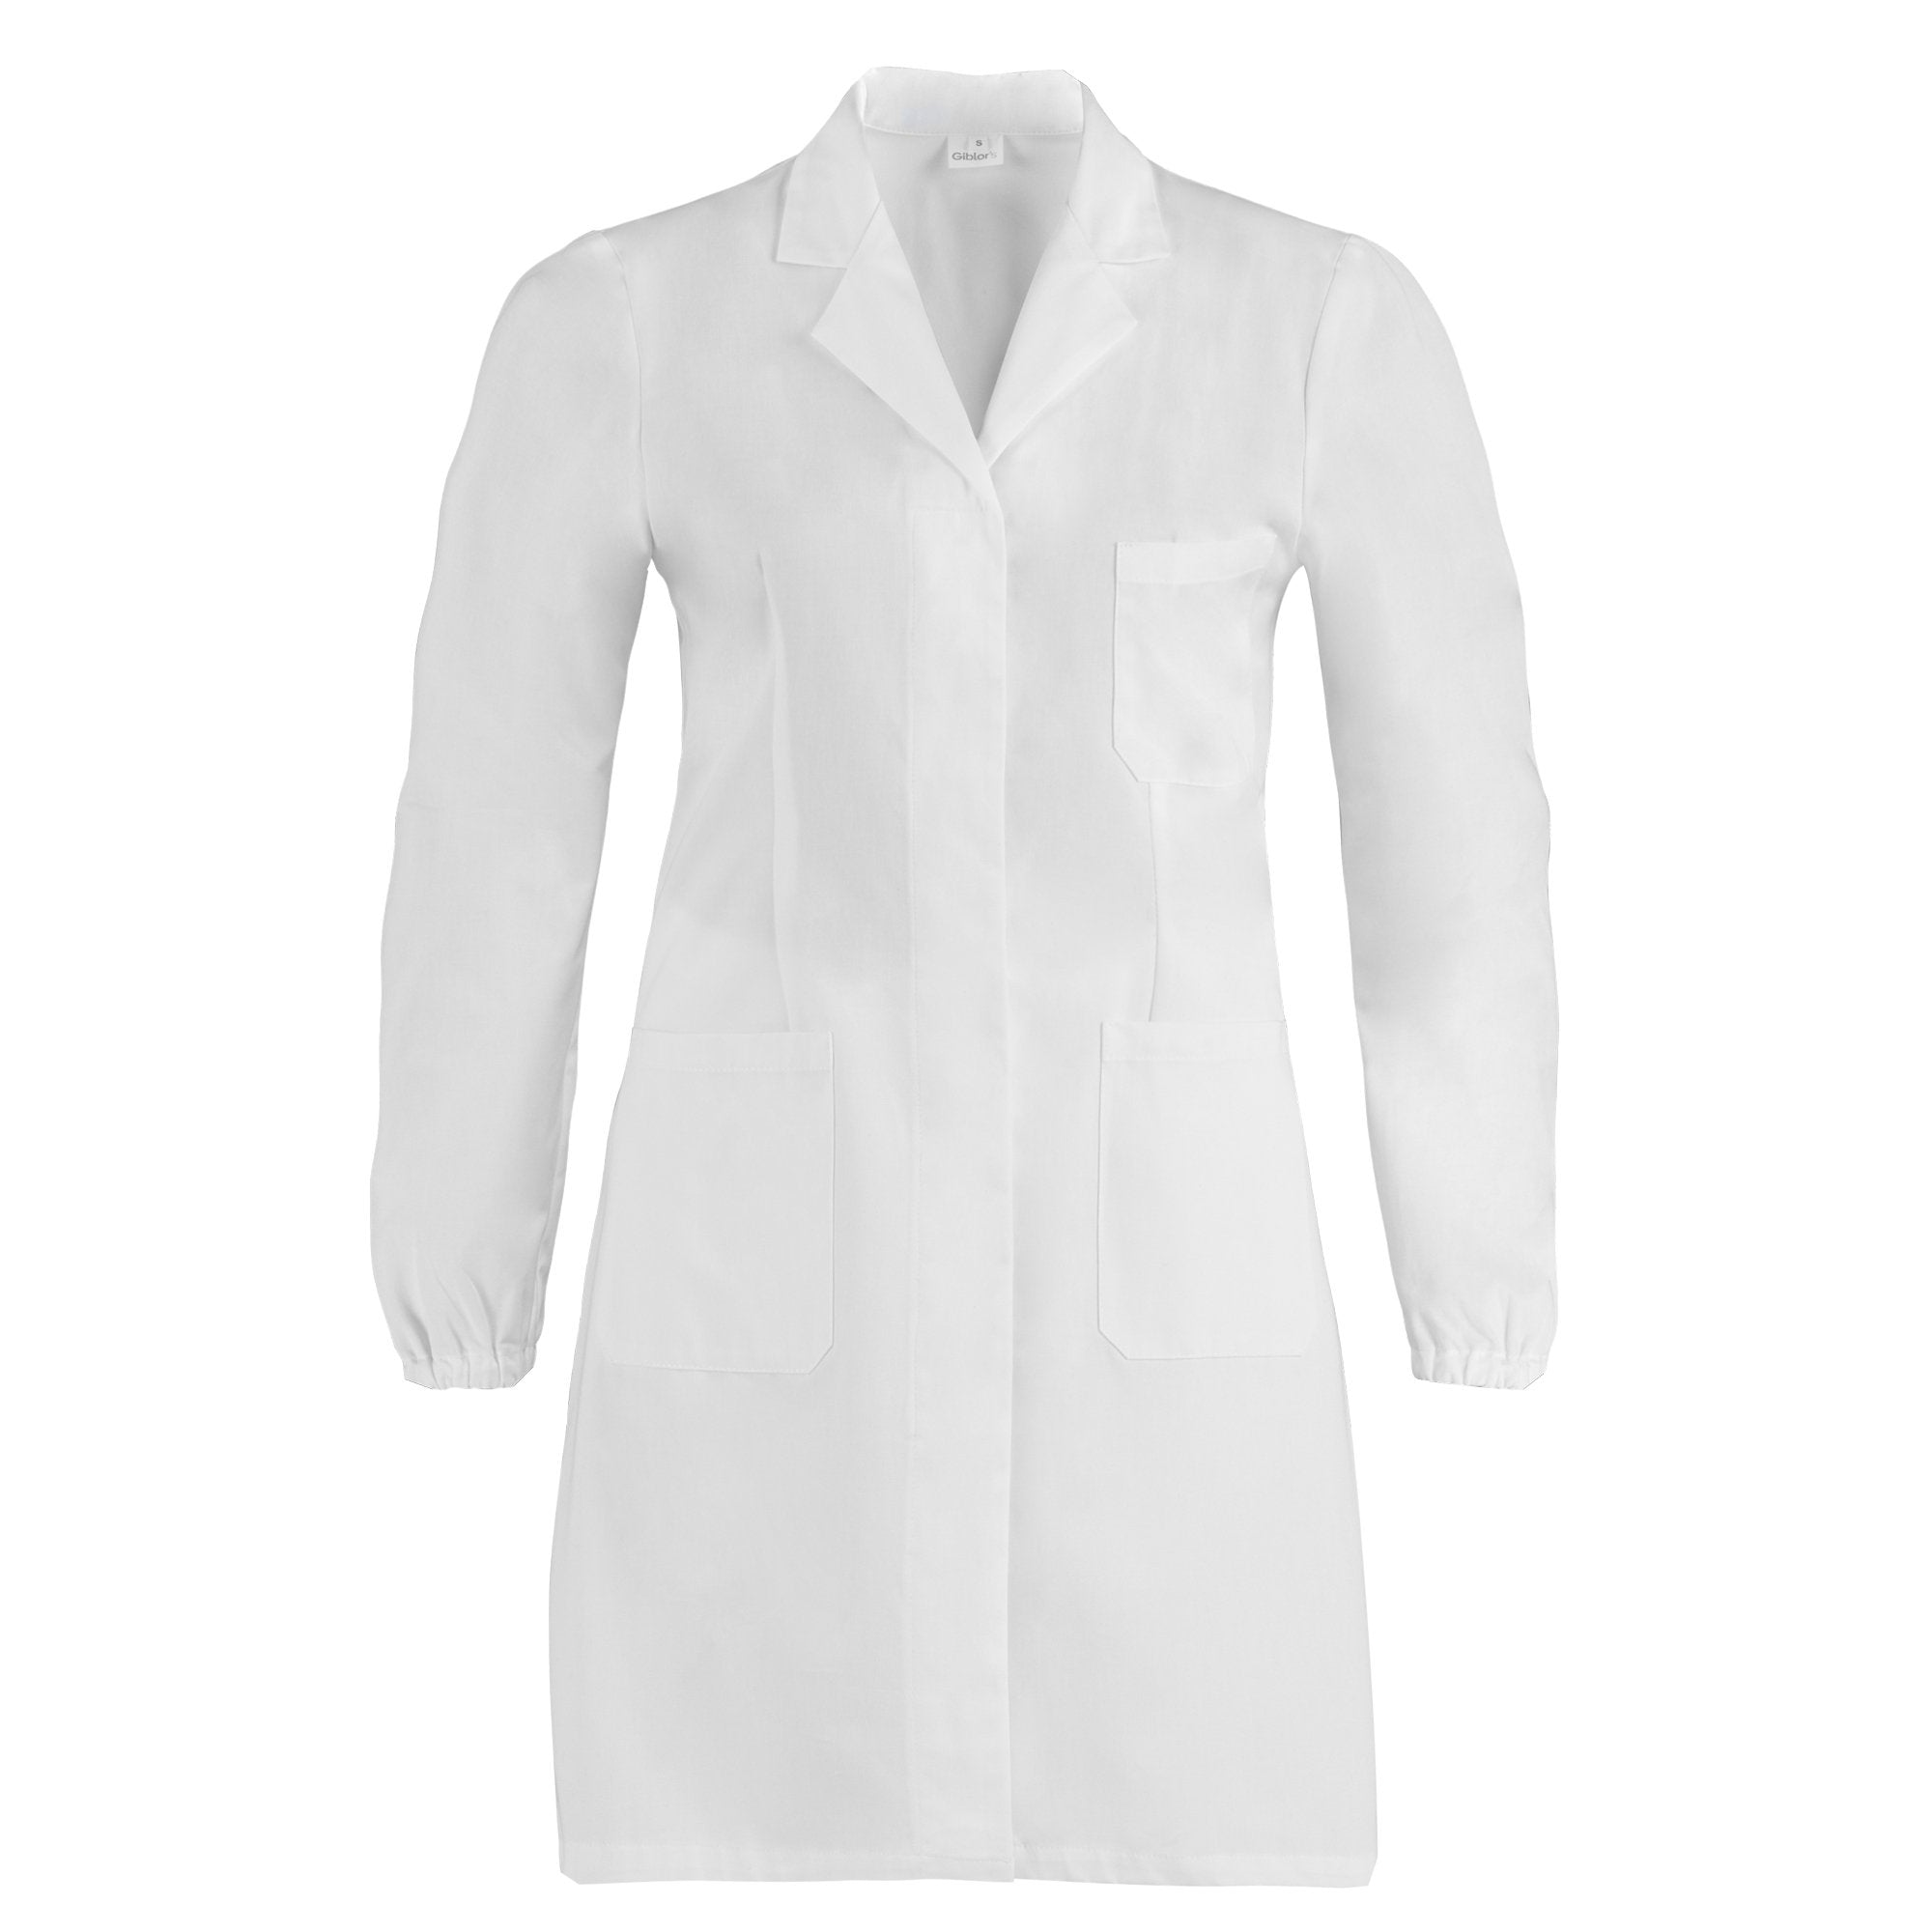 giblor's-camice-isotta-donna-tg-s-bianco